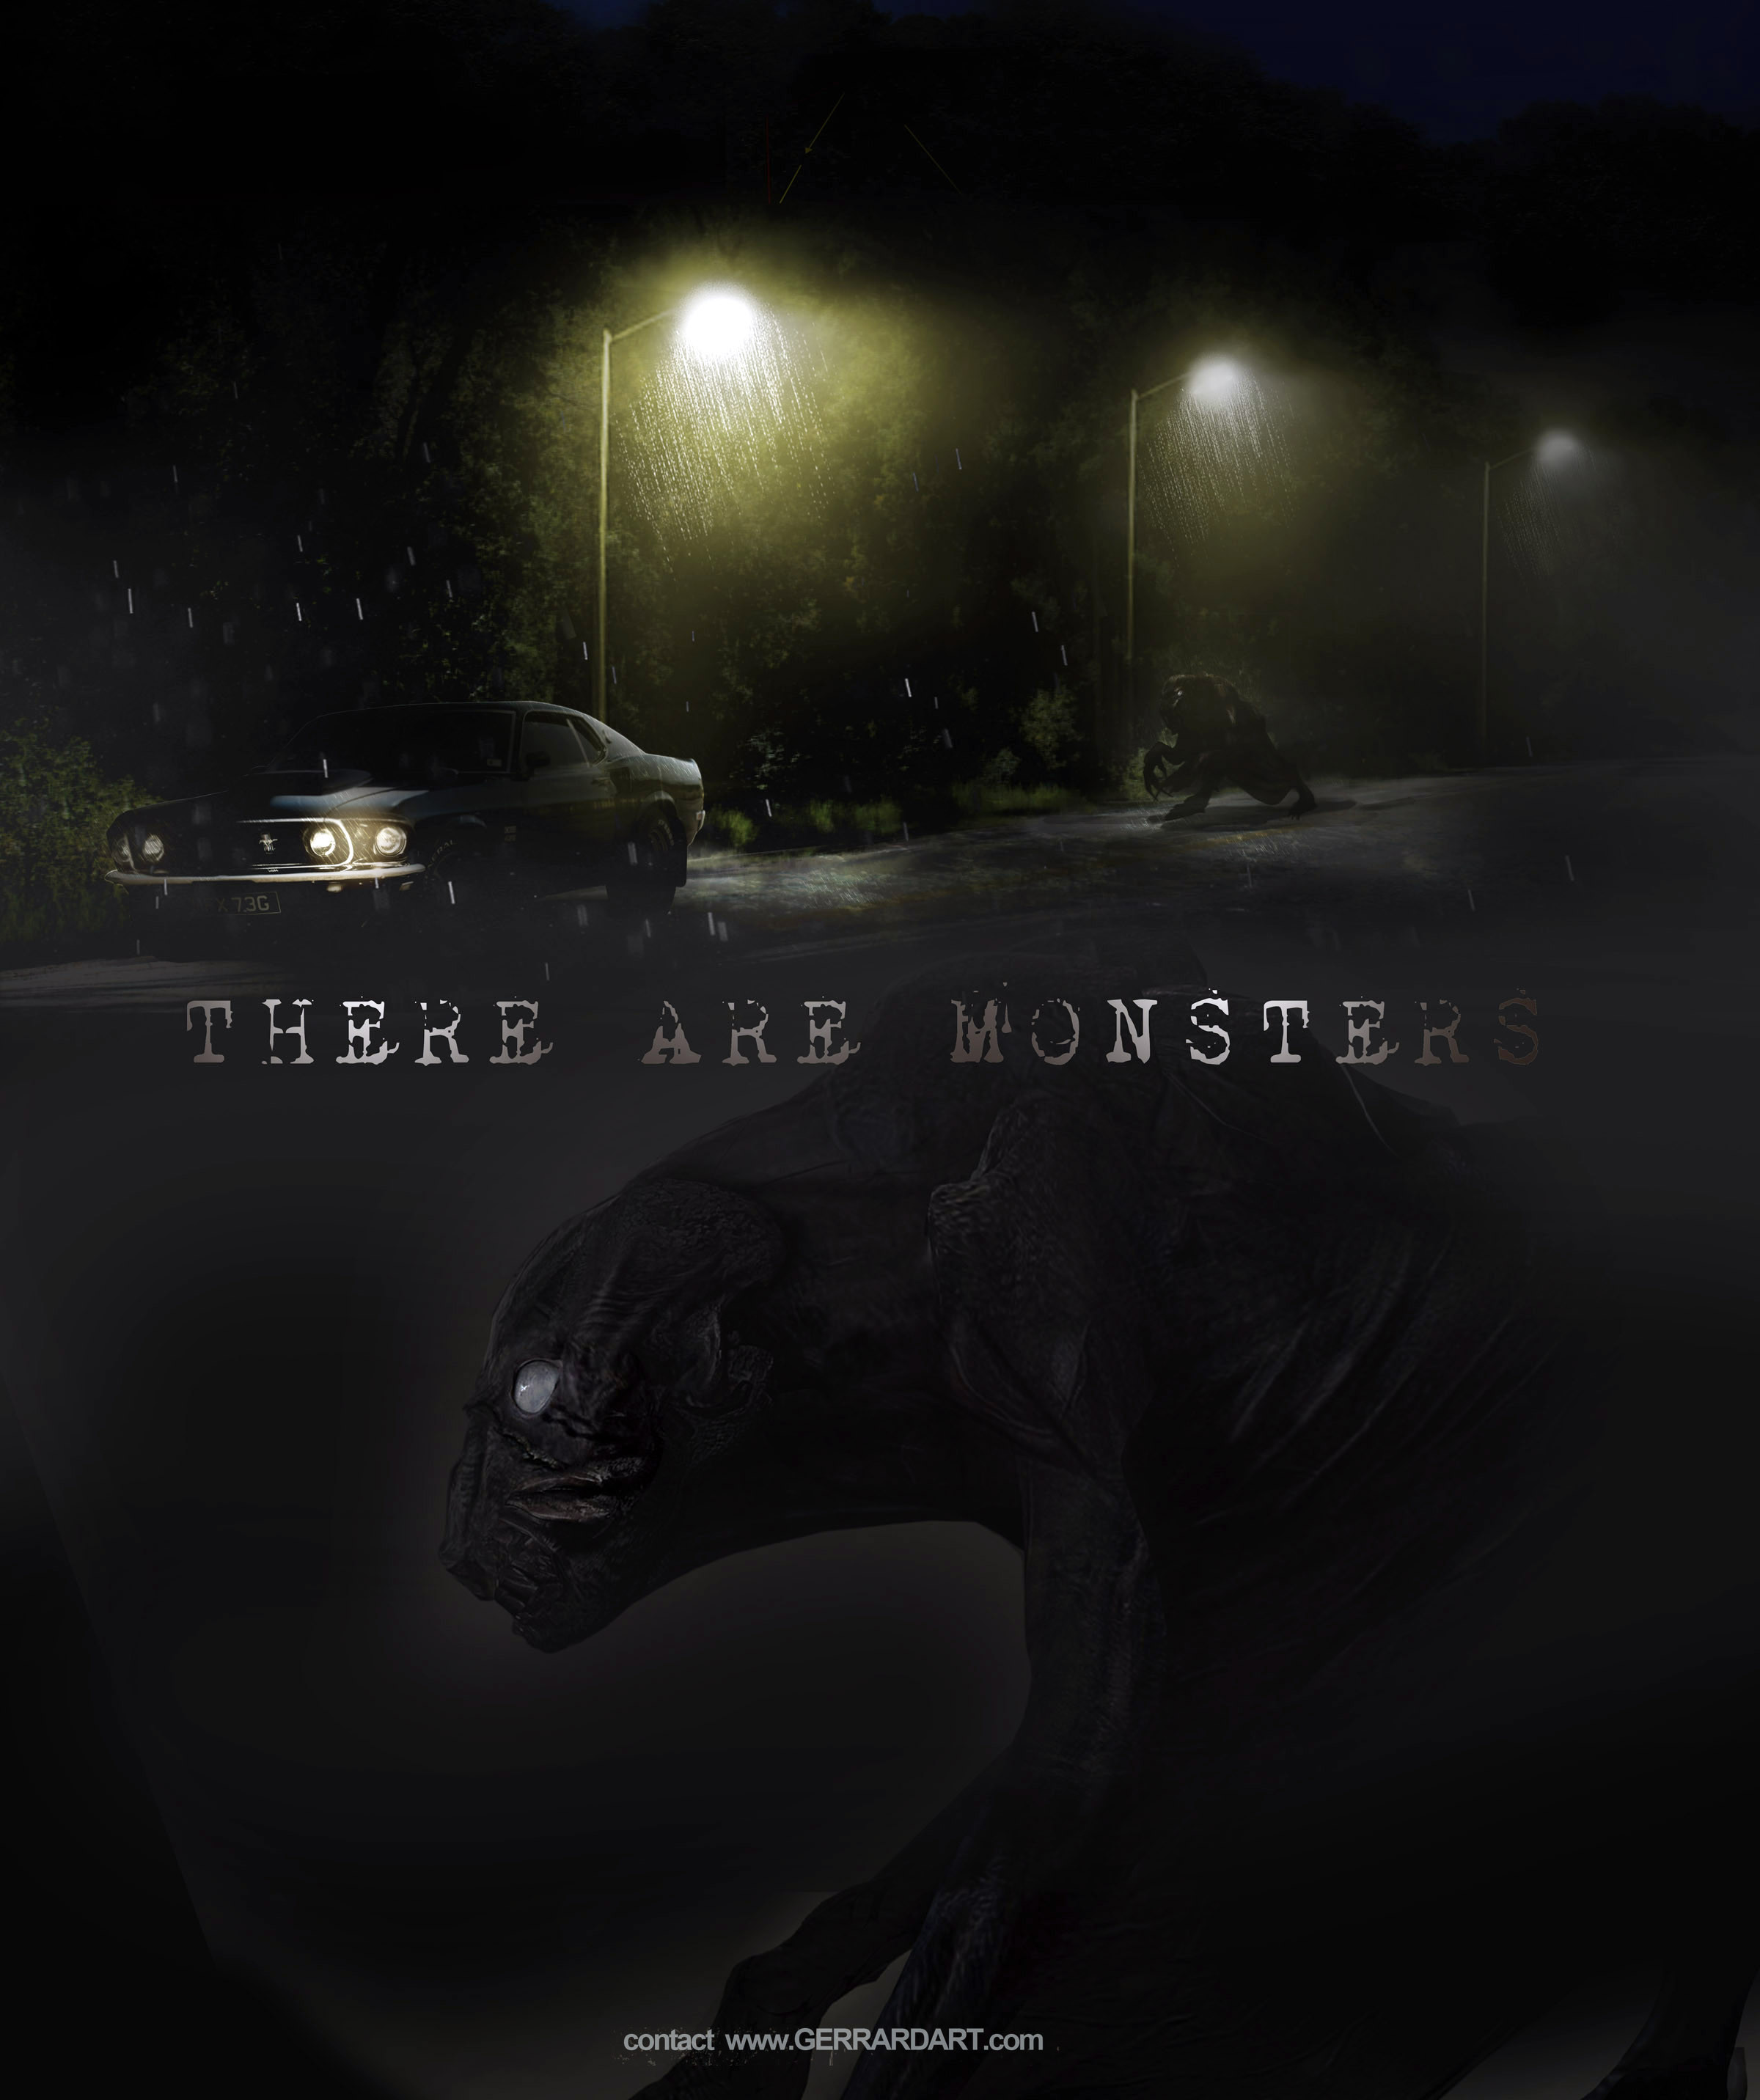 THE MONSTER  : Movie

Concept design for the MONSTER from the film, plus some promo images.